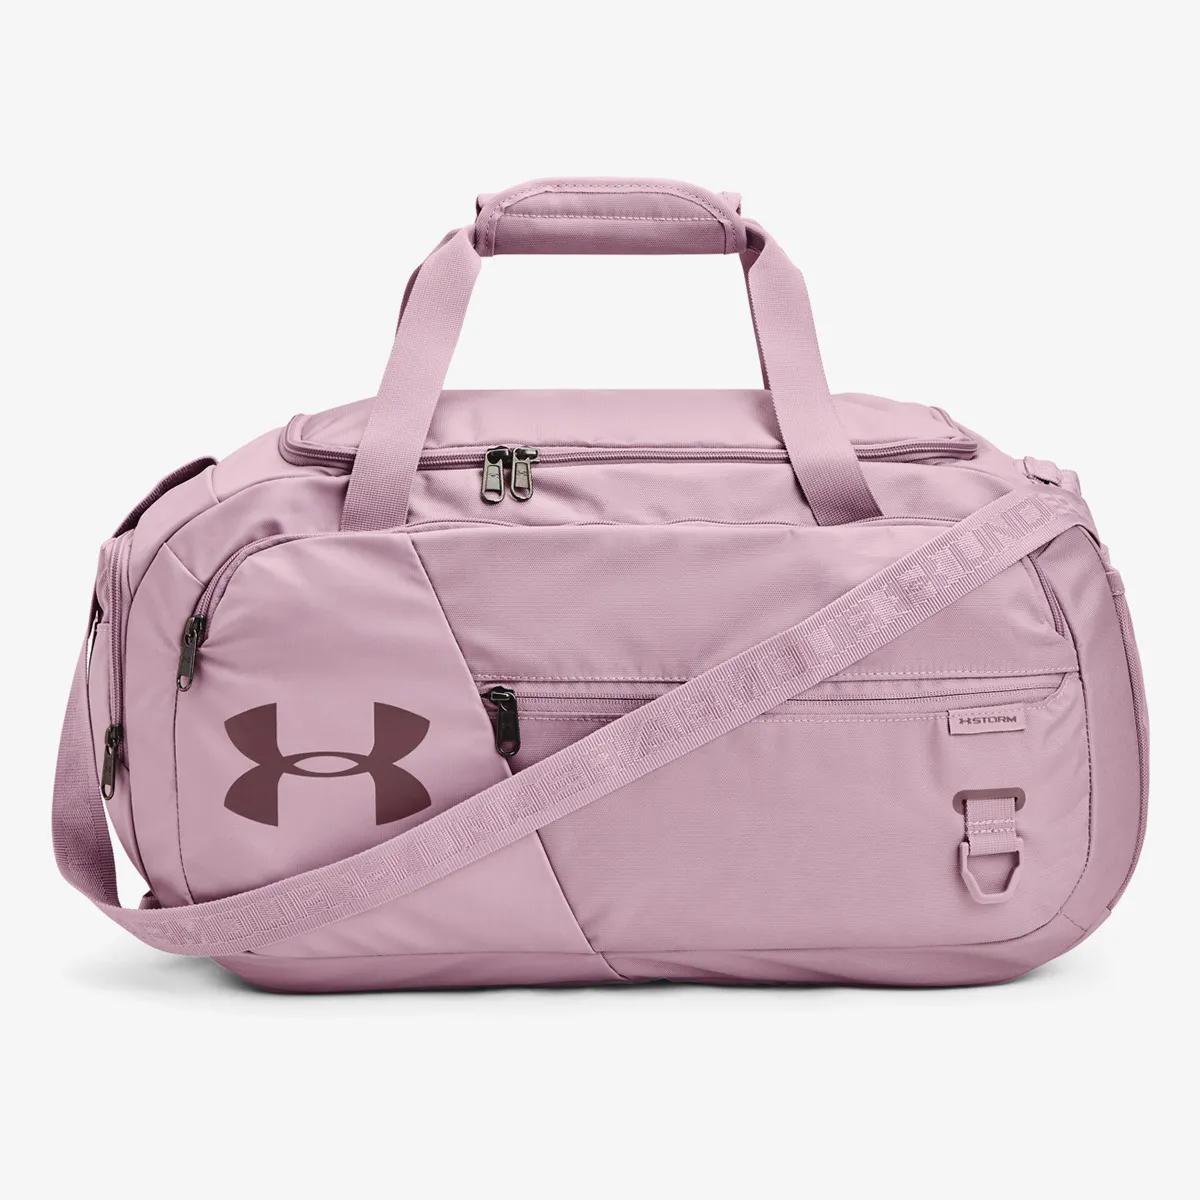 UNDER ARMOUR Undeniable 4.0 Duffle SM 